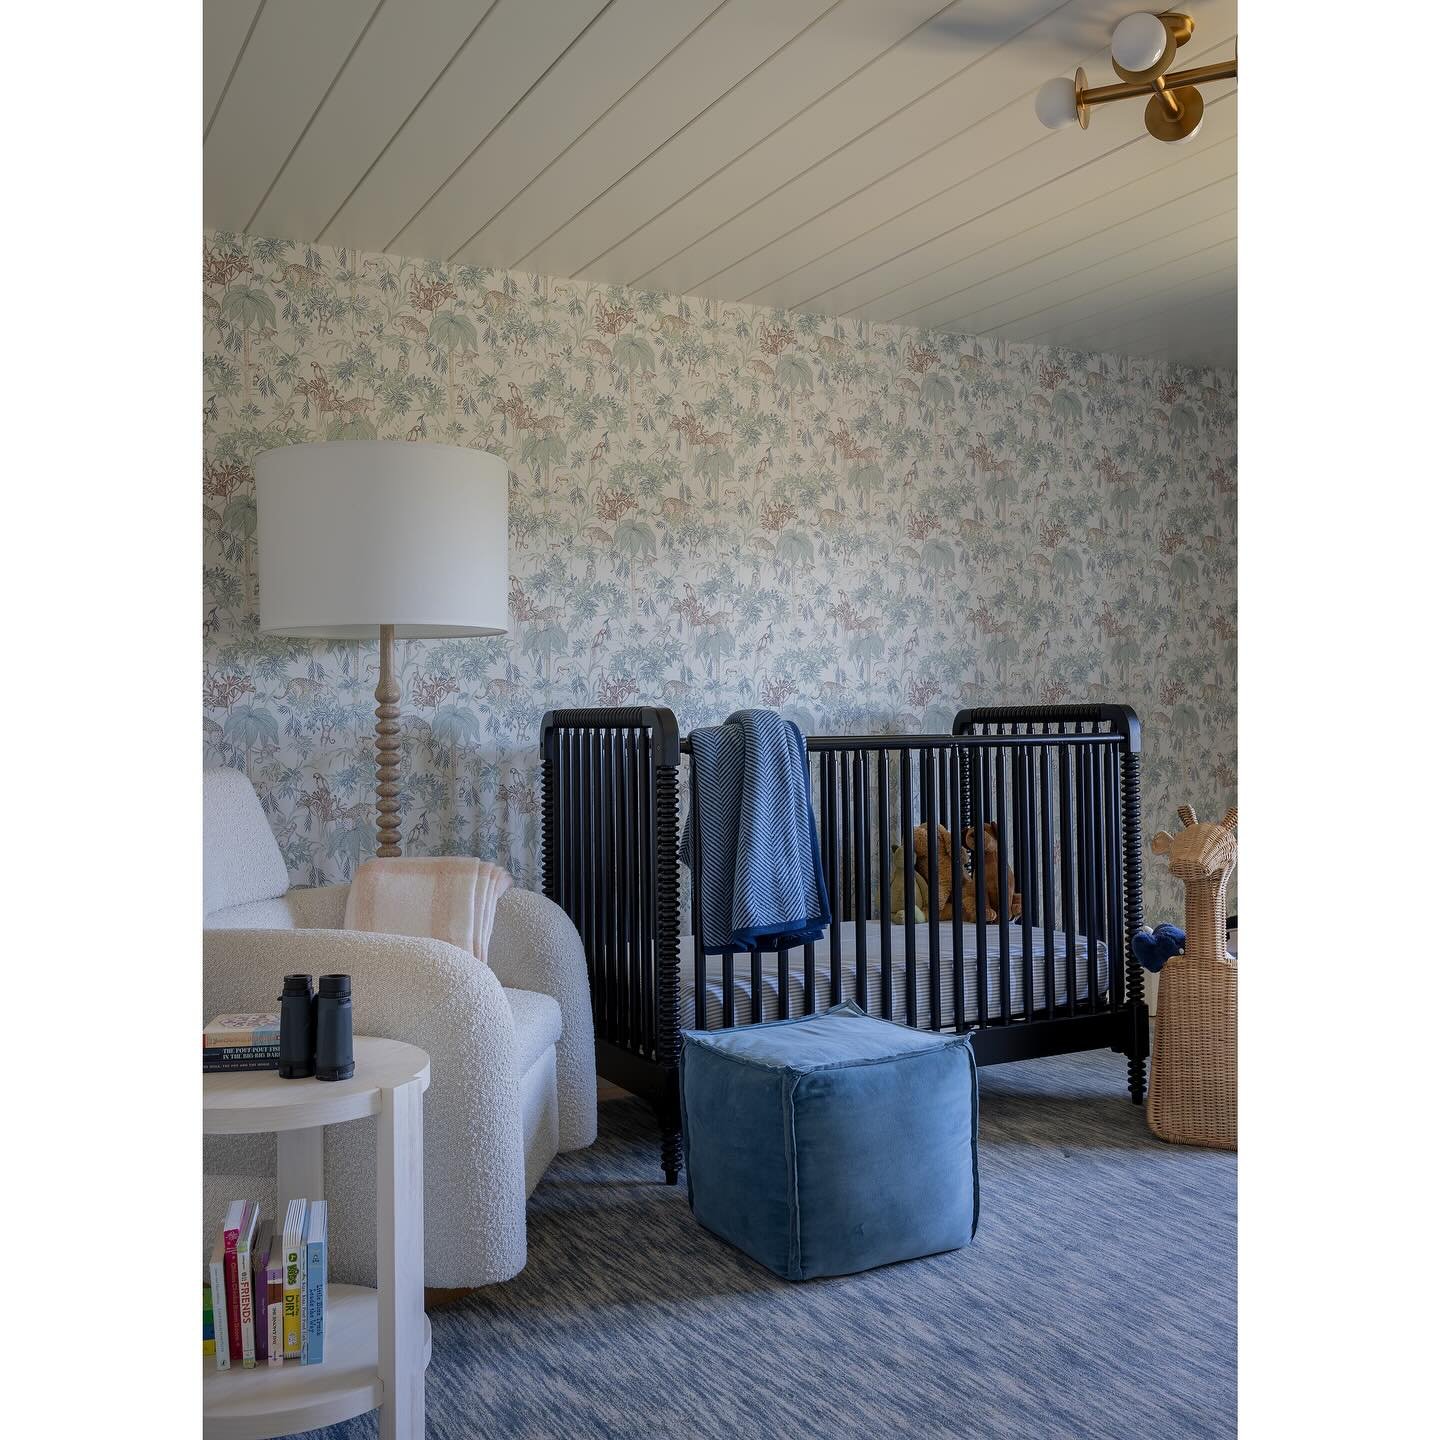 A sweet Into the Wild inspired nursery that can easily grow with this sweet little boy. 

Interiors: @behomeinteriors 
Photography: @michaeljleephotography